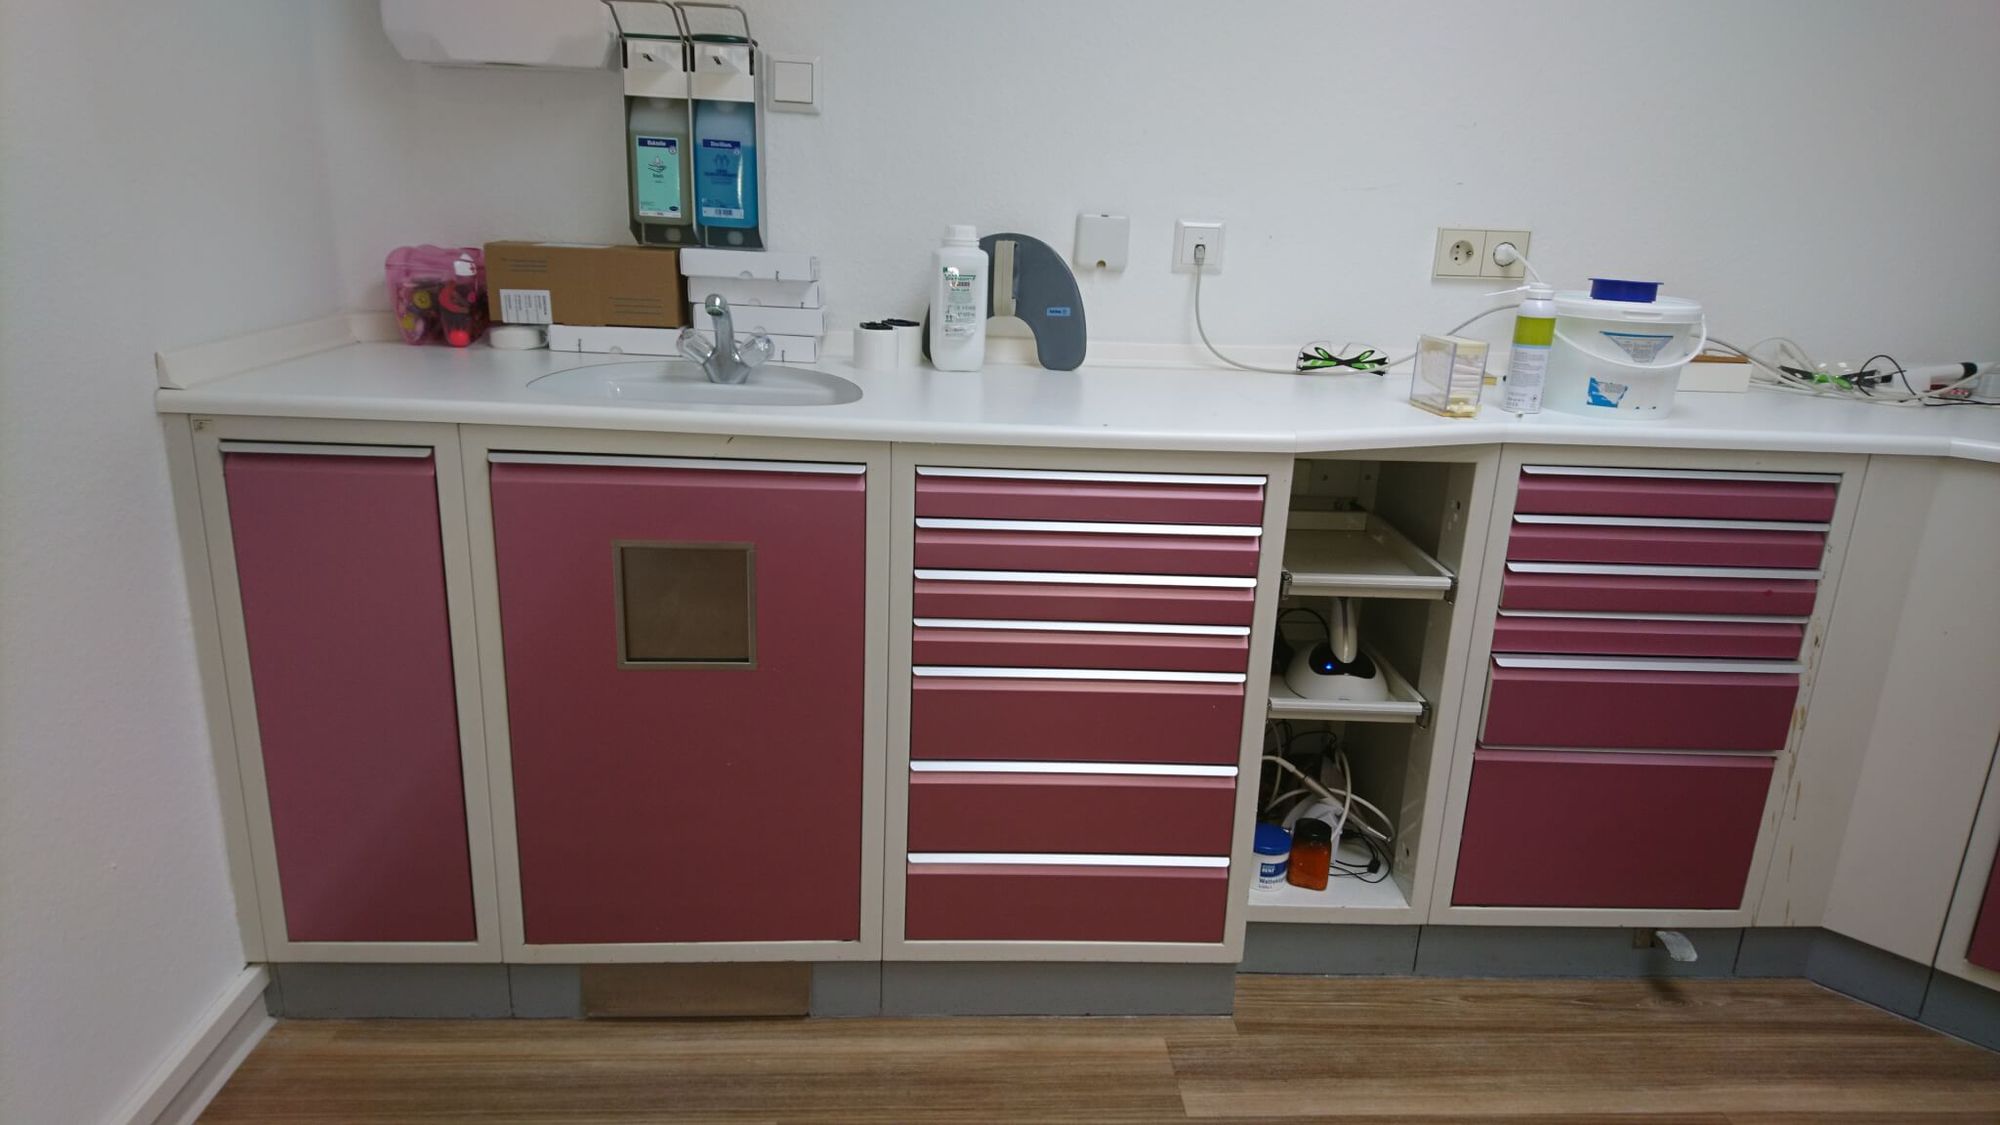 Renovating white metal medical practice furnishings, quickly and affordably 01